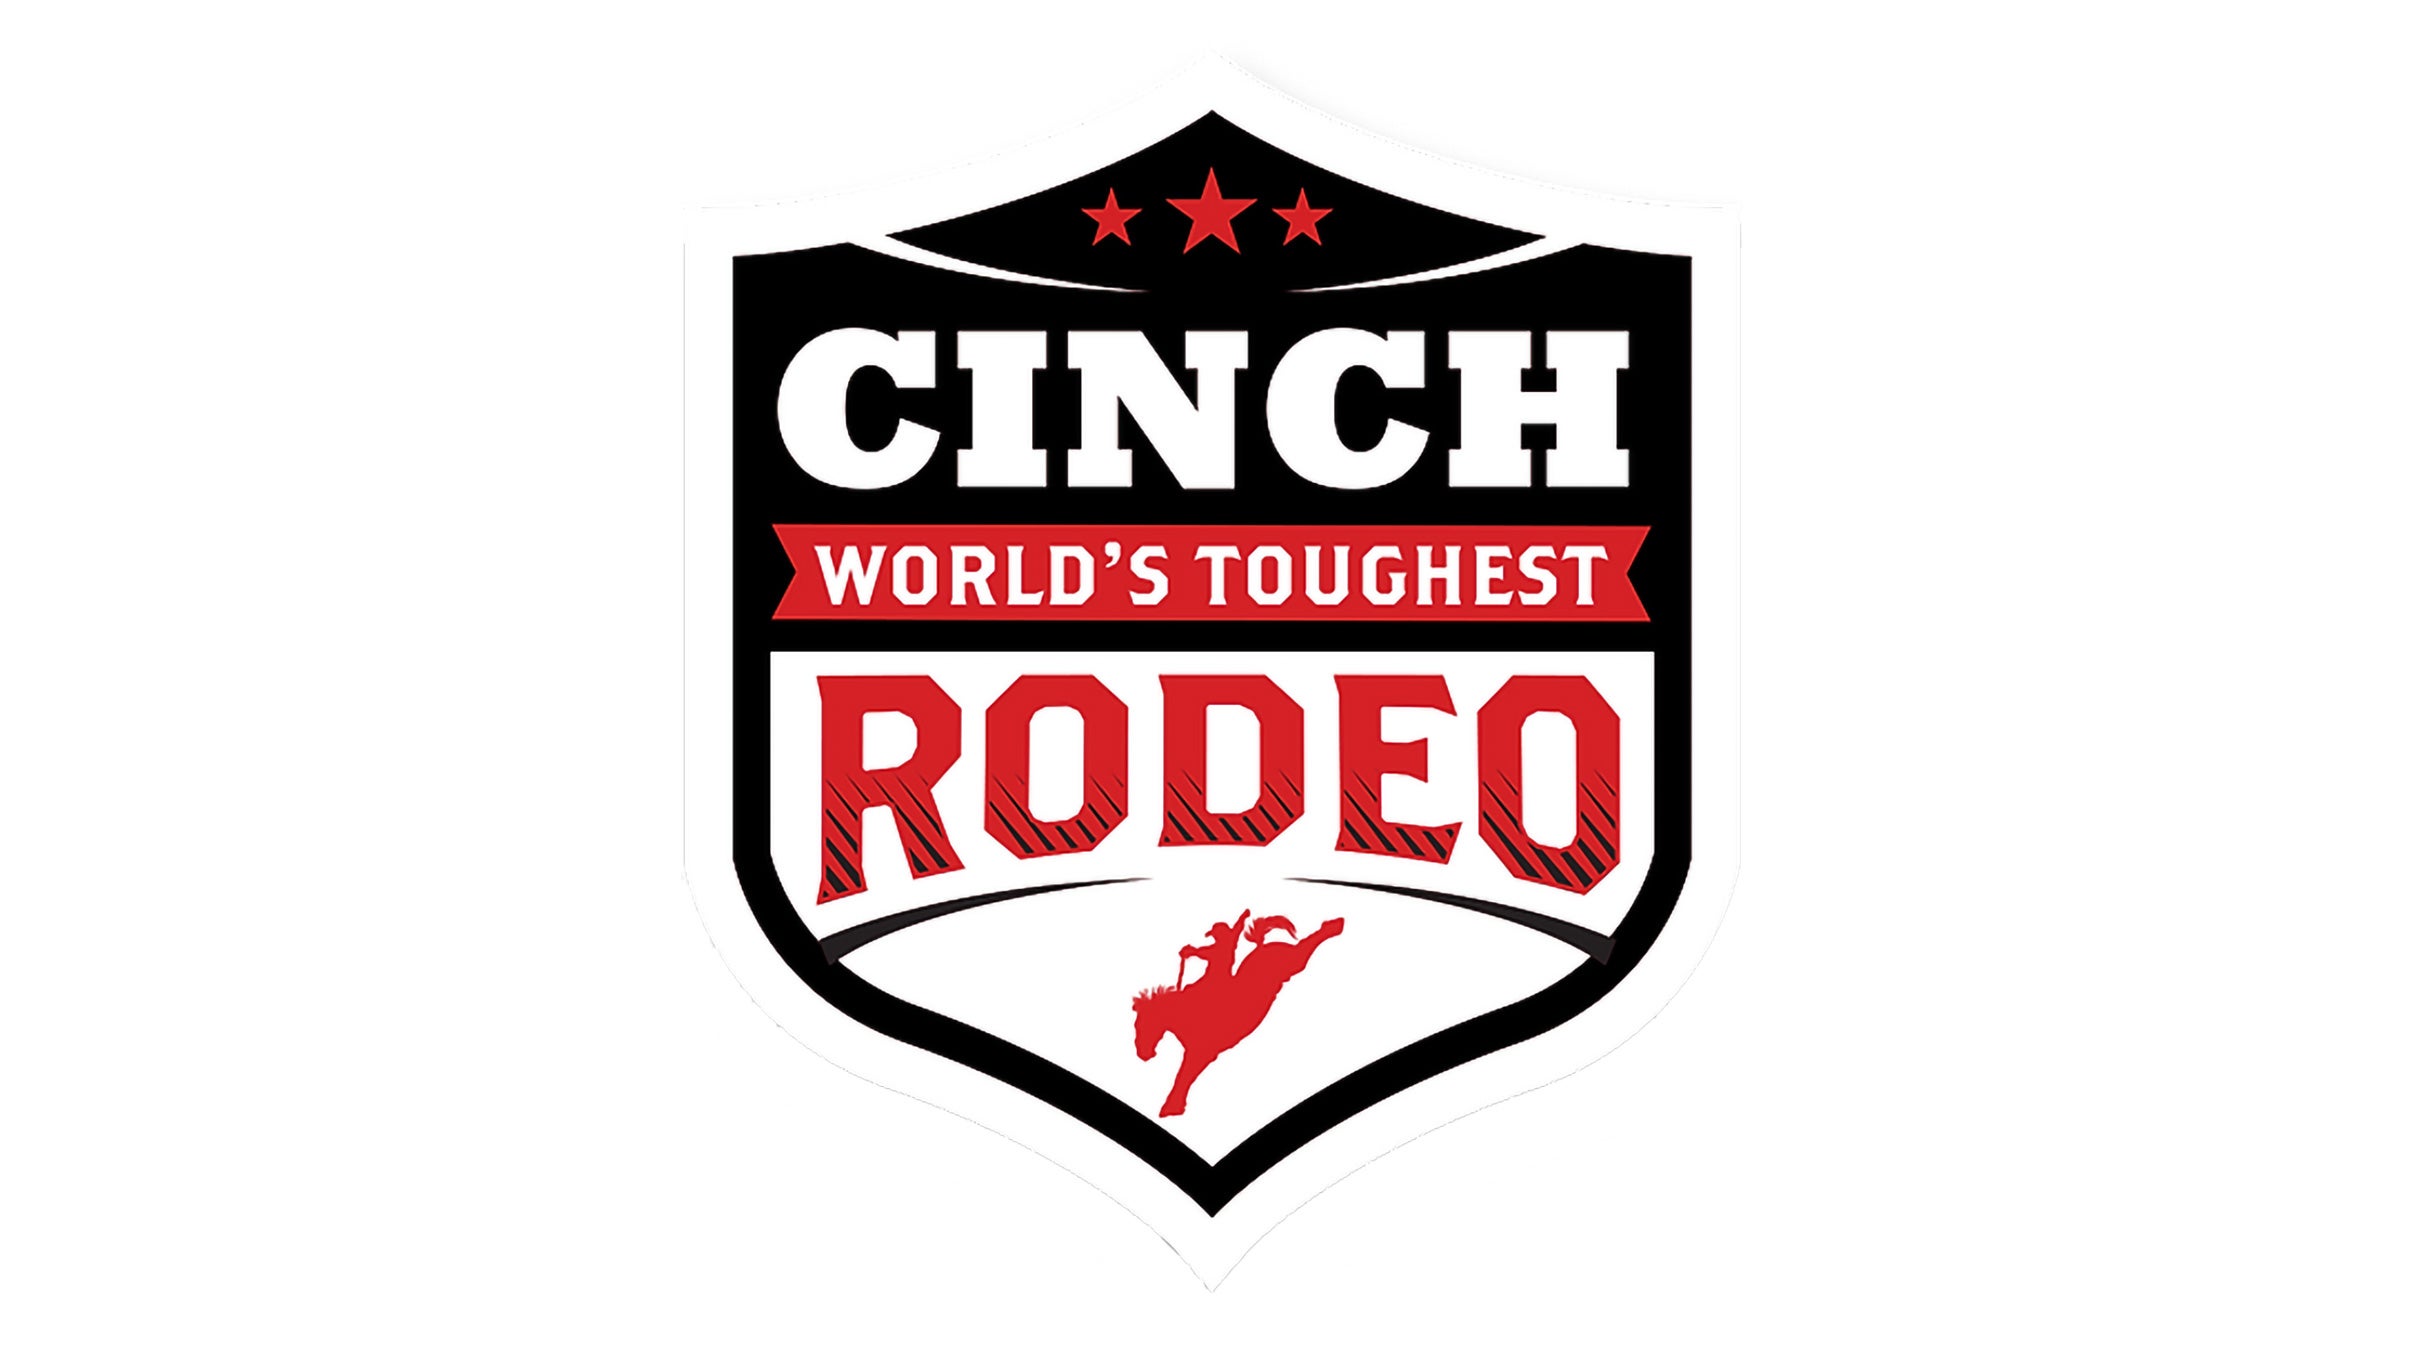 Cinch World's Toughest Rodeo in Raleigh promo photo for Ticketmaster presale offer code